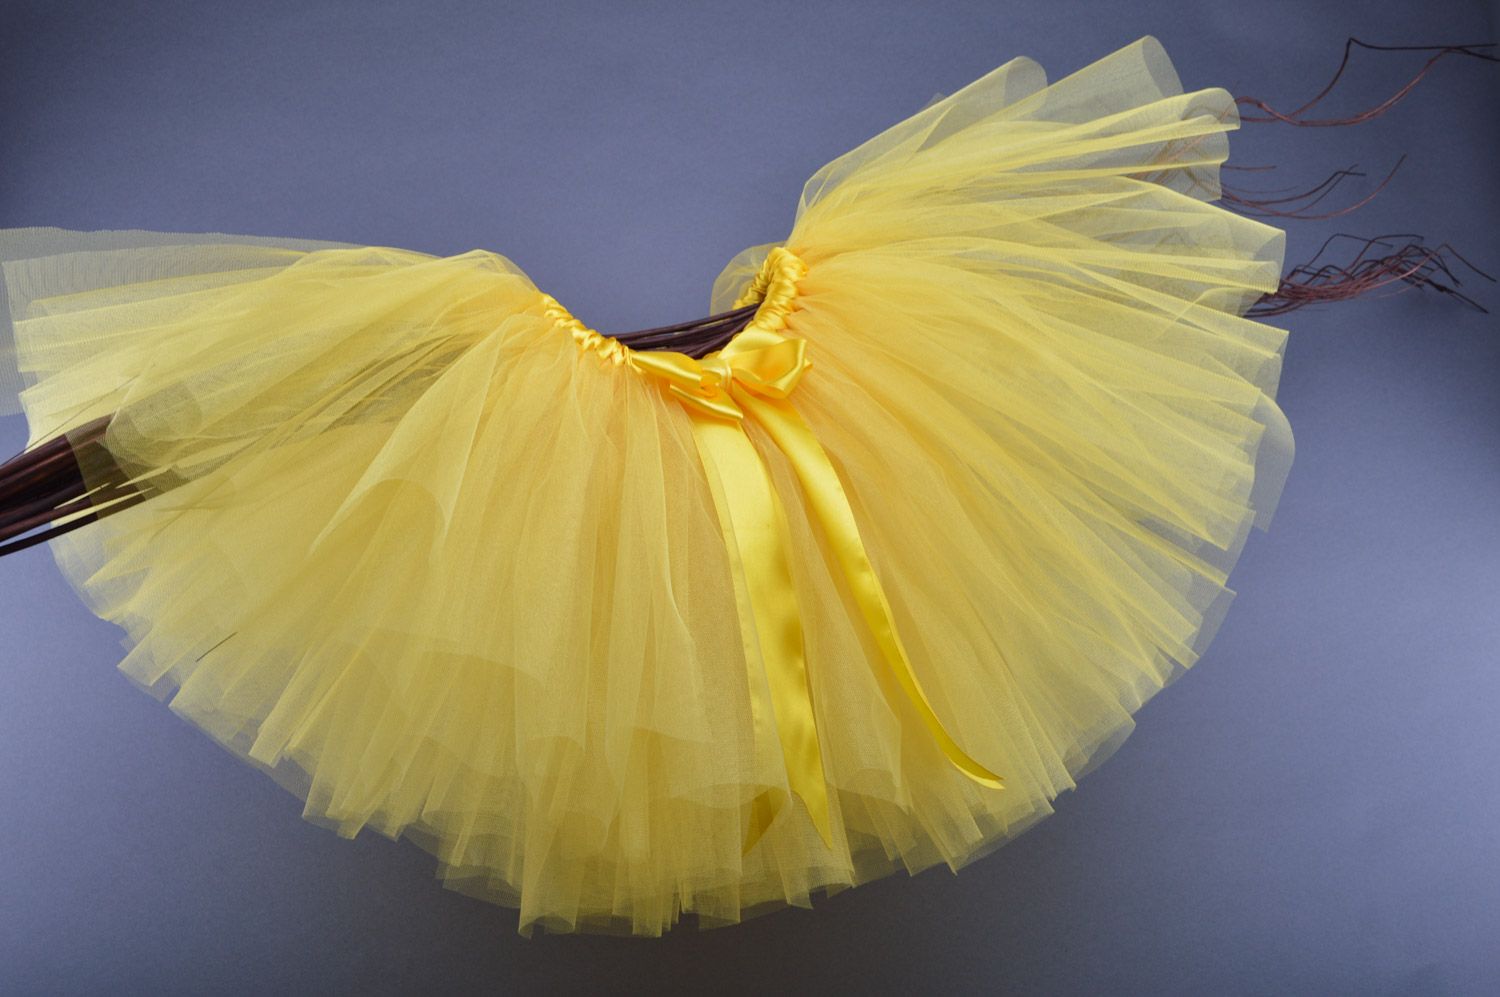 Handmade ballet tutu skirt sewn of bright yellow tulle and ribbons for children photo 5